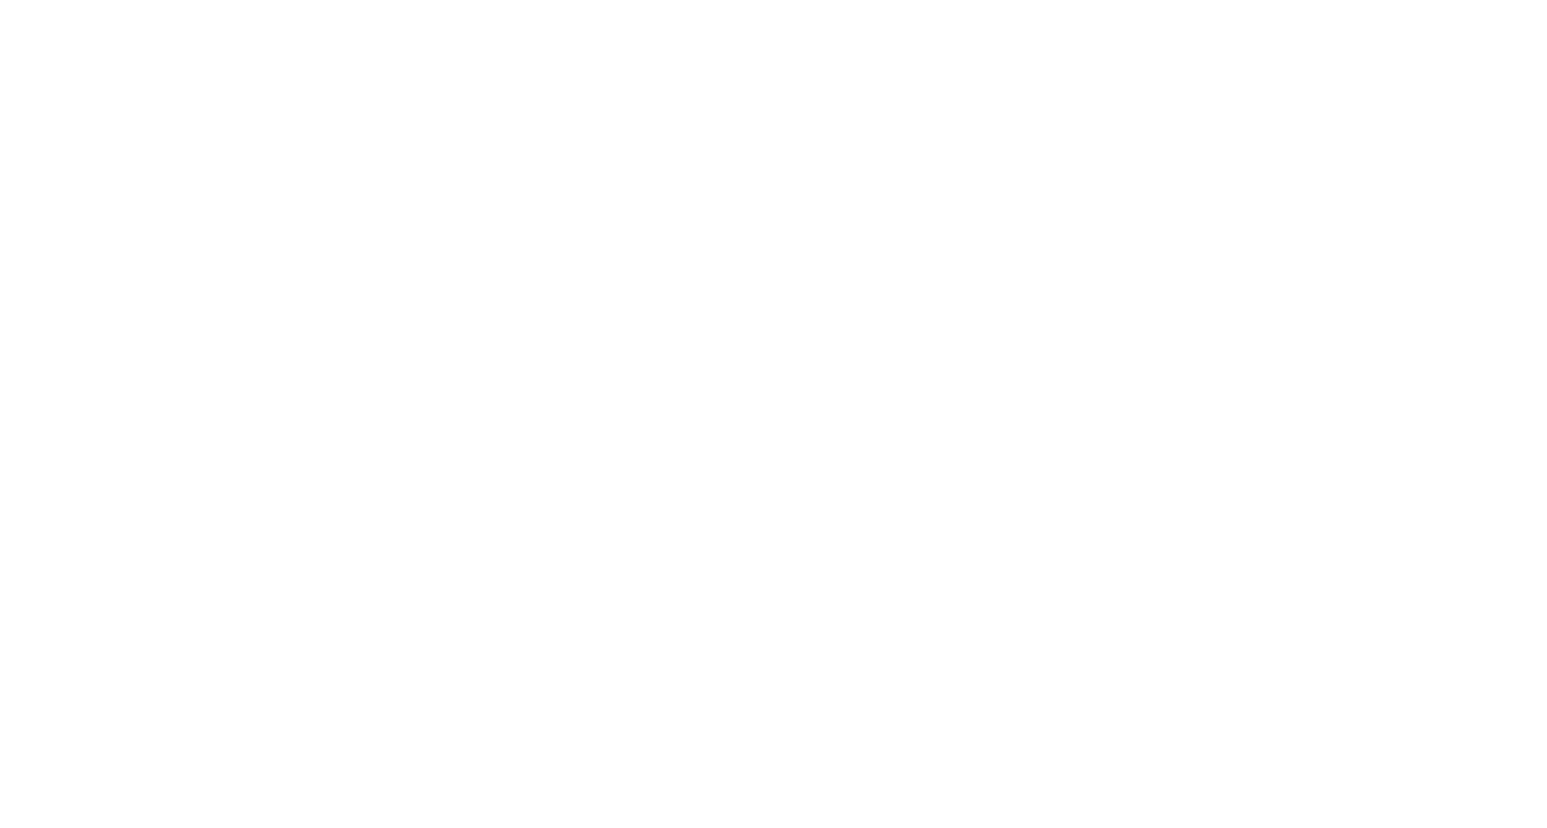 Real Estate Agency Limnios Property Group - Perth